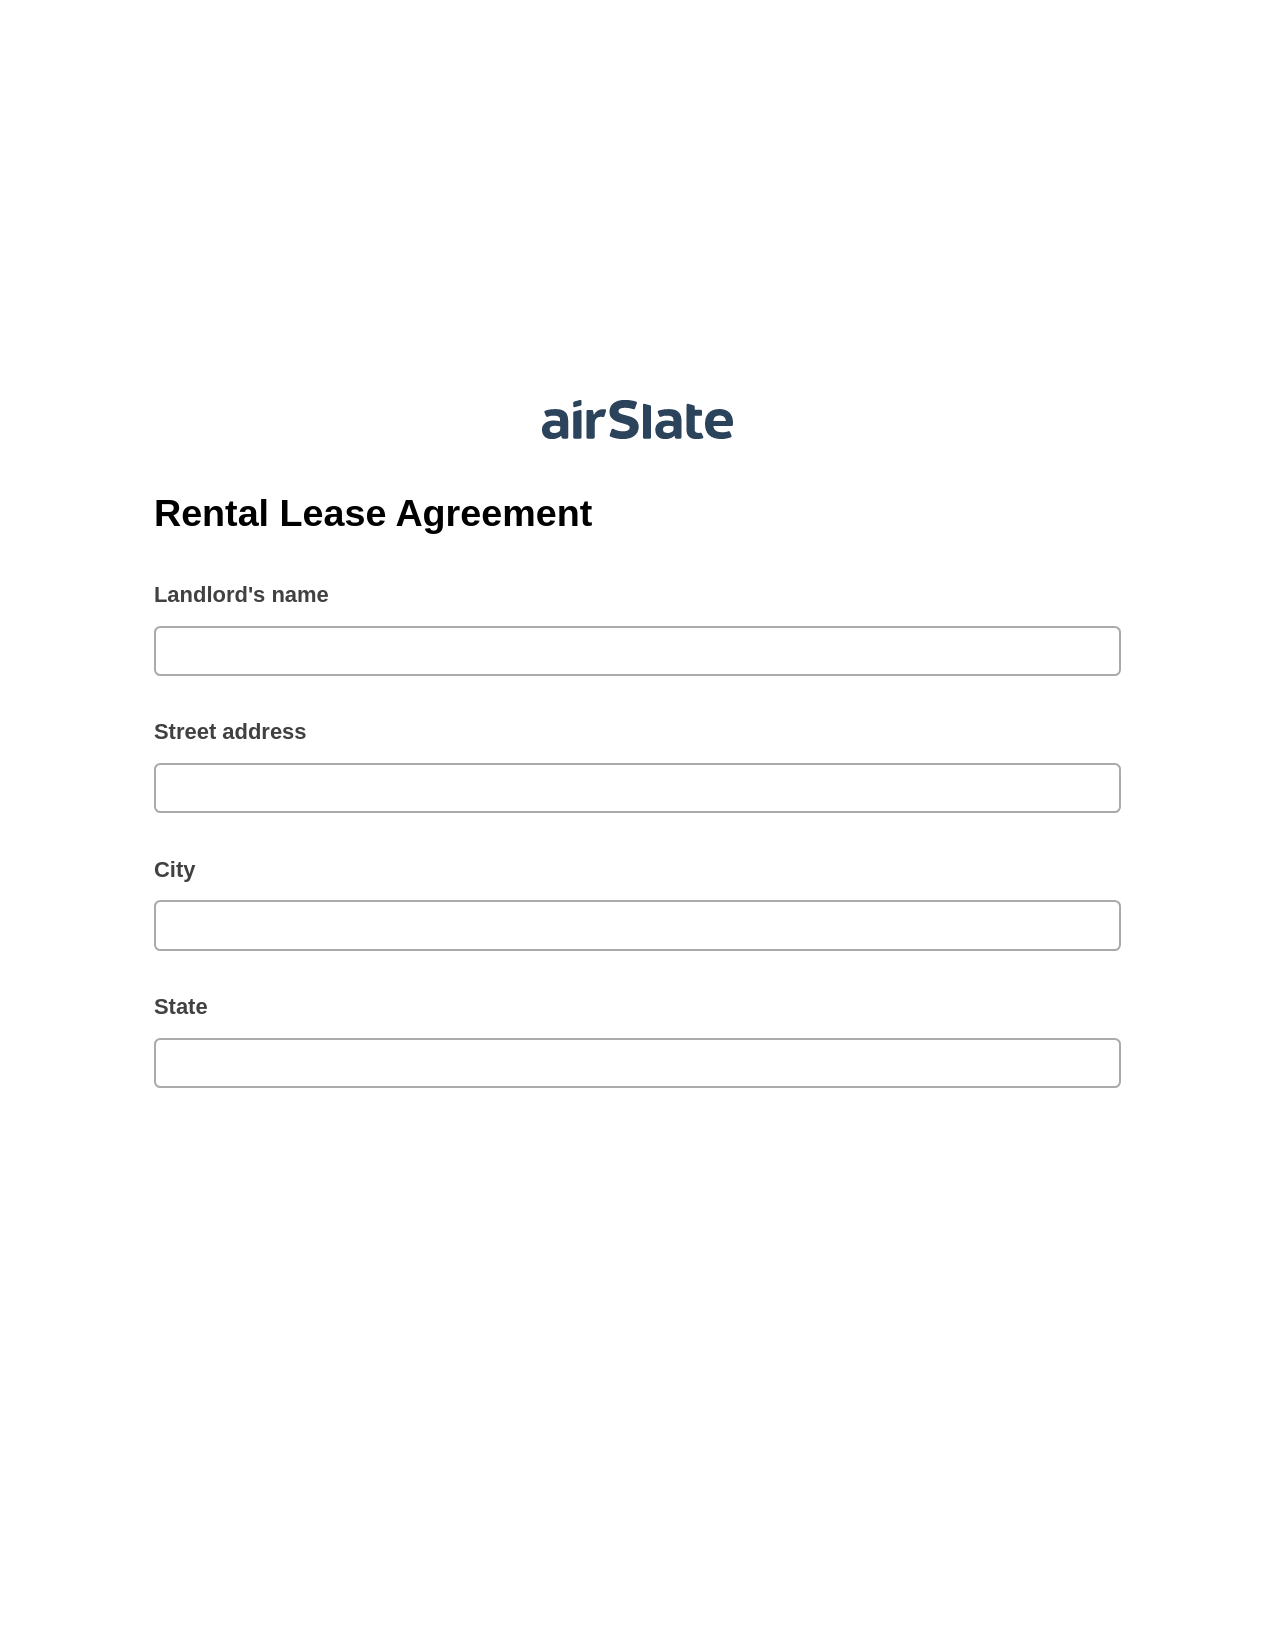 Rental Lease Agreement Pre-fill from NetSuite Records Bot, In-person Signing Bot, Post-finish Document Bot